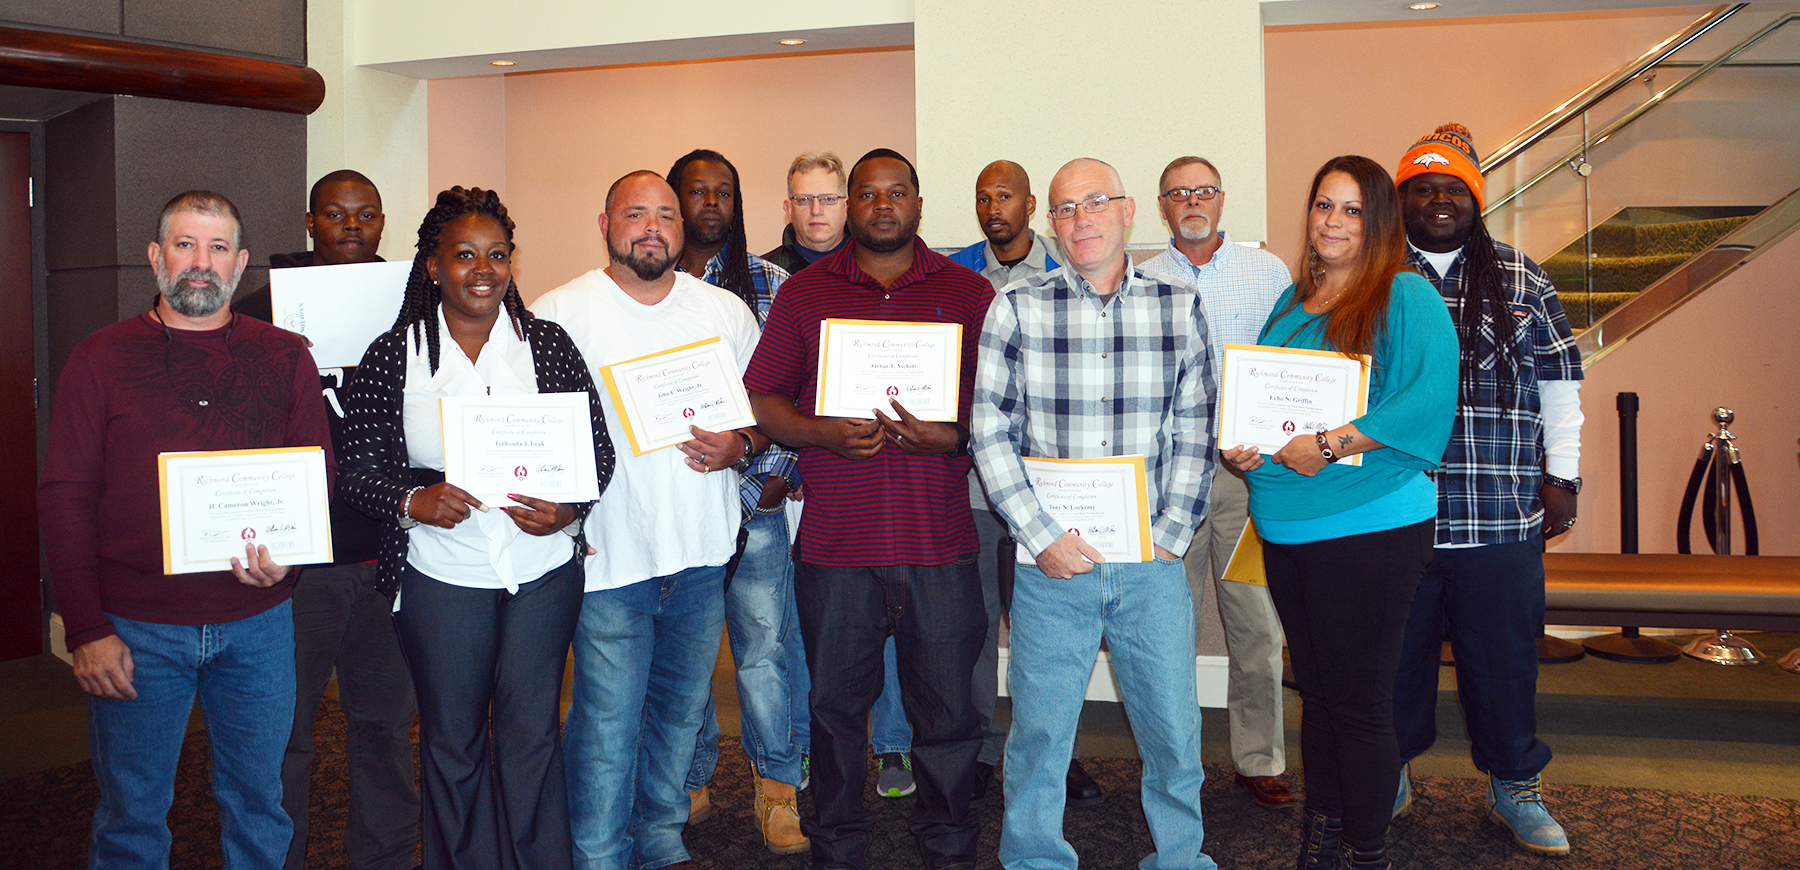 Pictured are the 12 students who graduated Nov. 22 from the truck driver training program at Richmond Community College.